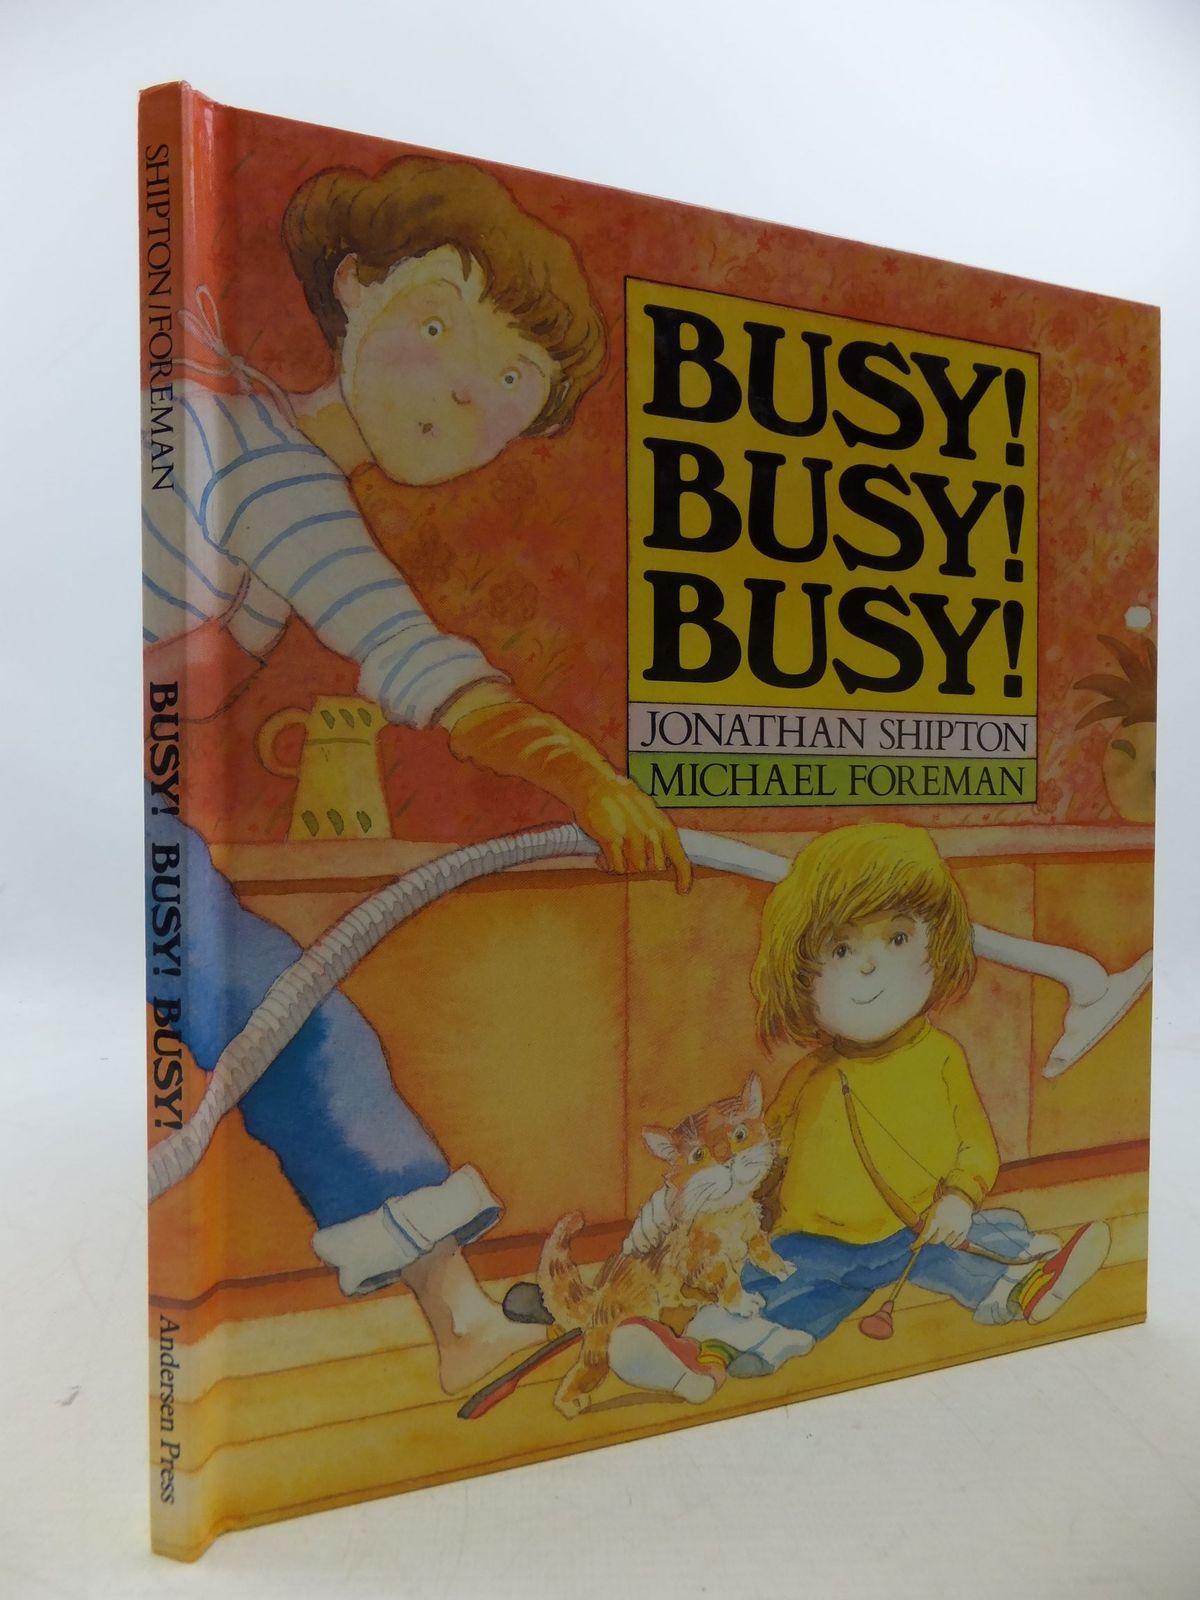 Photo of BUSY! BUSY! BUSY! written by Shipton, Jonathan illustrated by Foreman, Michael published by Andersen Press (STOCK CODE: 1710148)  for sale by Stella & Rose's Books